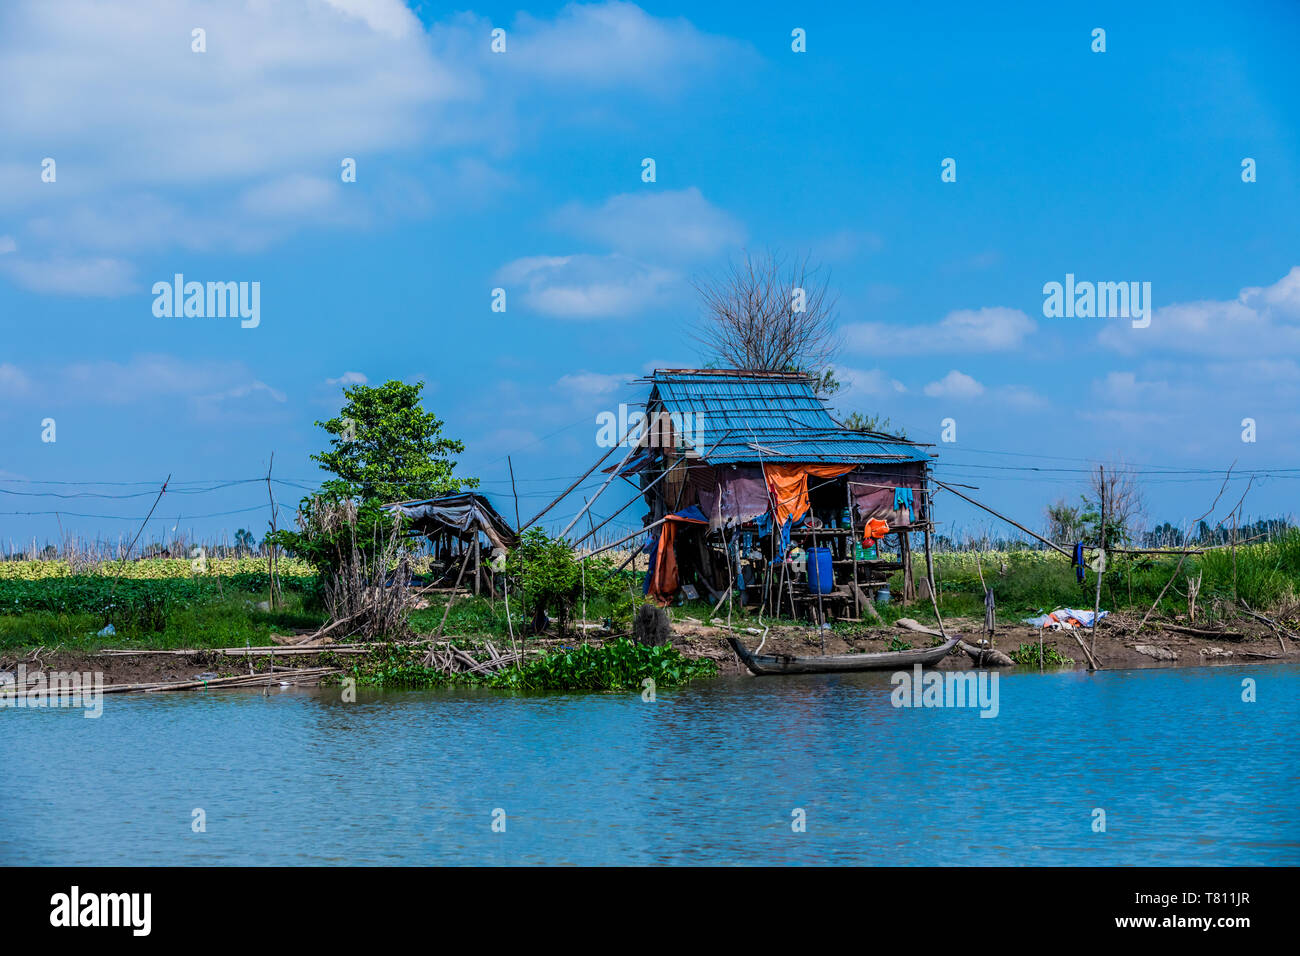 Village life on the Mekong Delta, Vietnam, Indochina, Southeast Asia, Asia Stock Photo